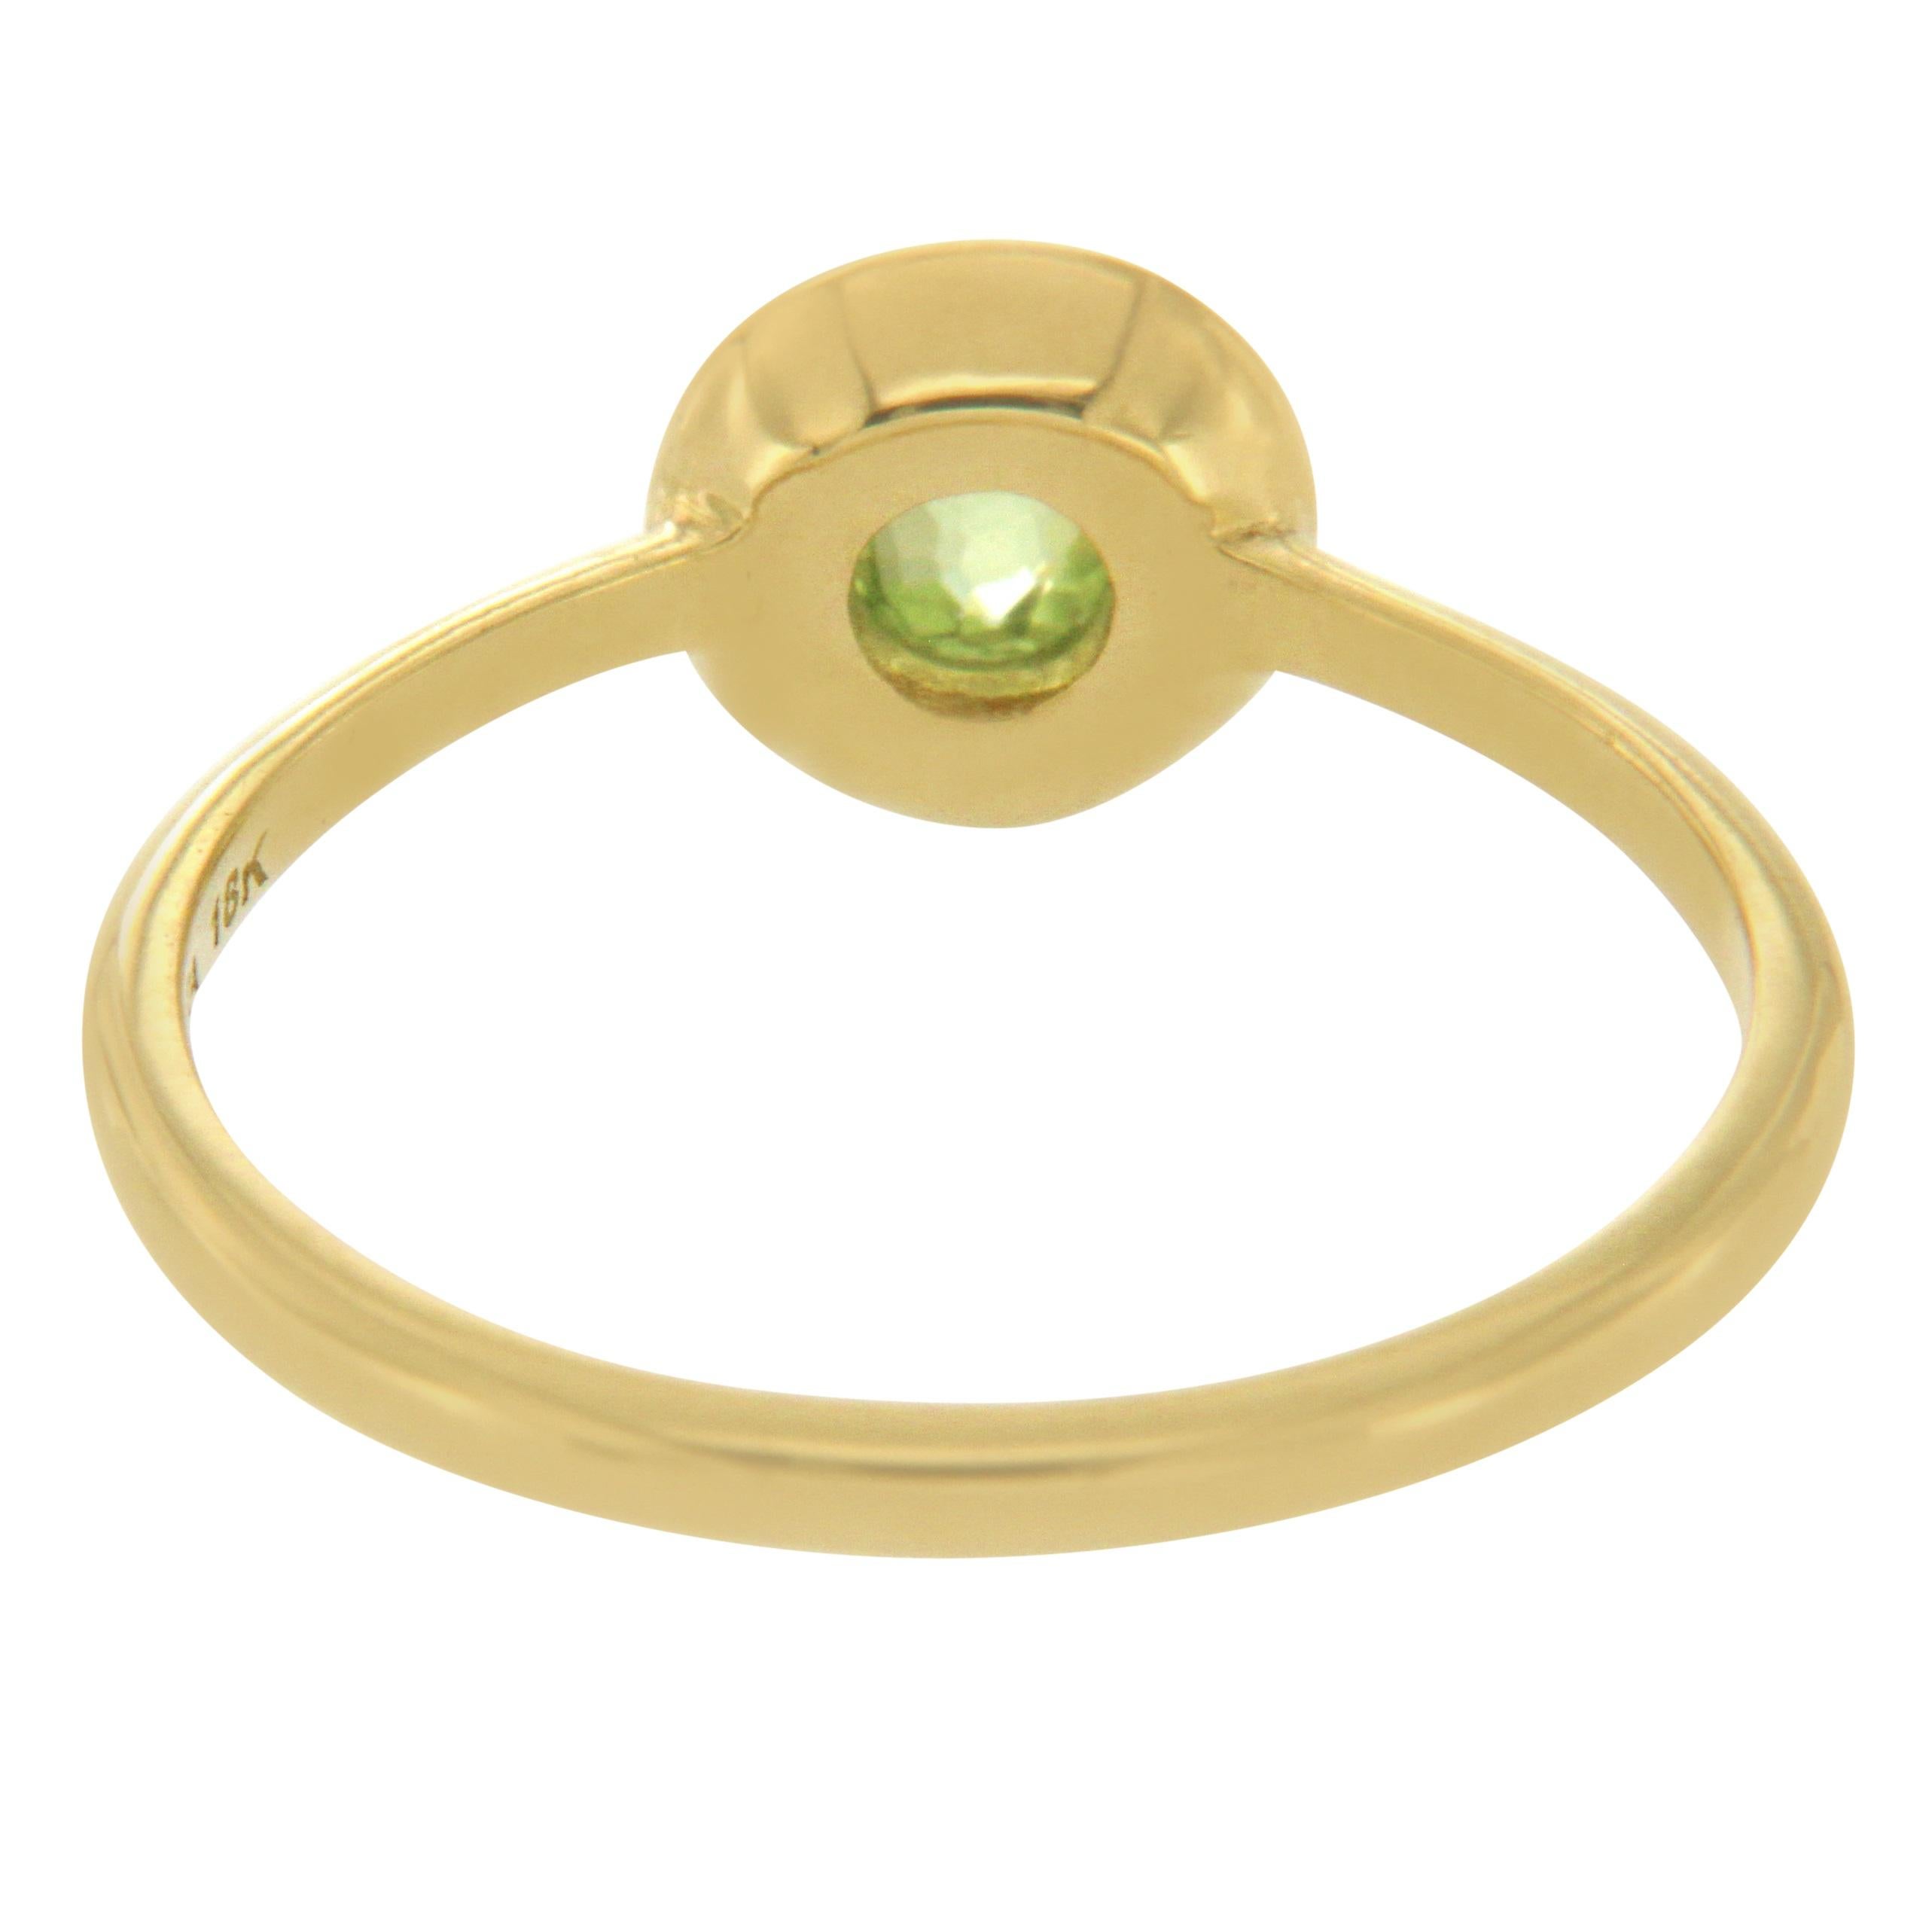 Type: Ring
Top: 7 mm
Band Width: 1.7 mm
Metal: Yellow Gold
Metal Purity: 18K.
Hallmarks: Ippolita 18K
Total Weight: 2.3 Grams
Stone Type: Diamonds & Peridot
Condition: New
Stock Number: U512
Retail Price:$895